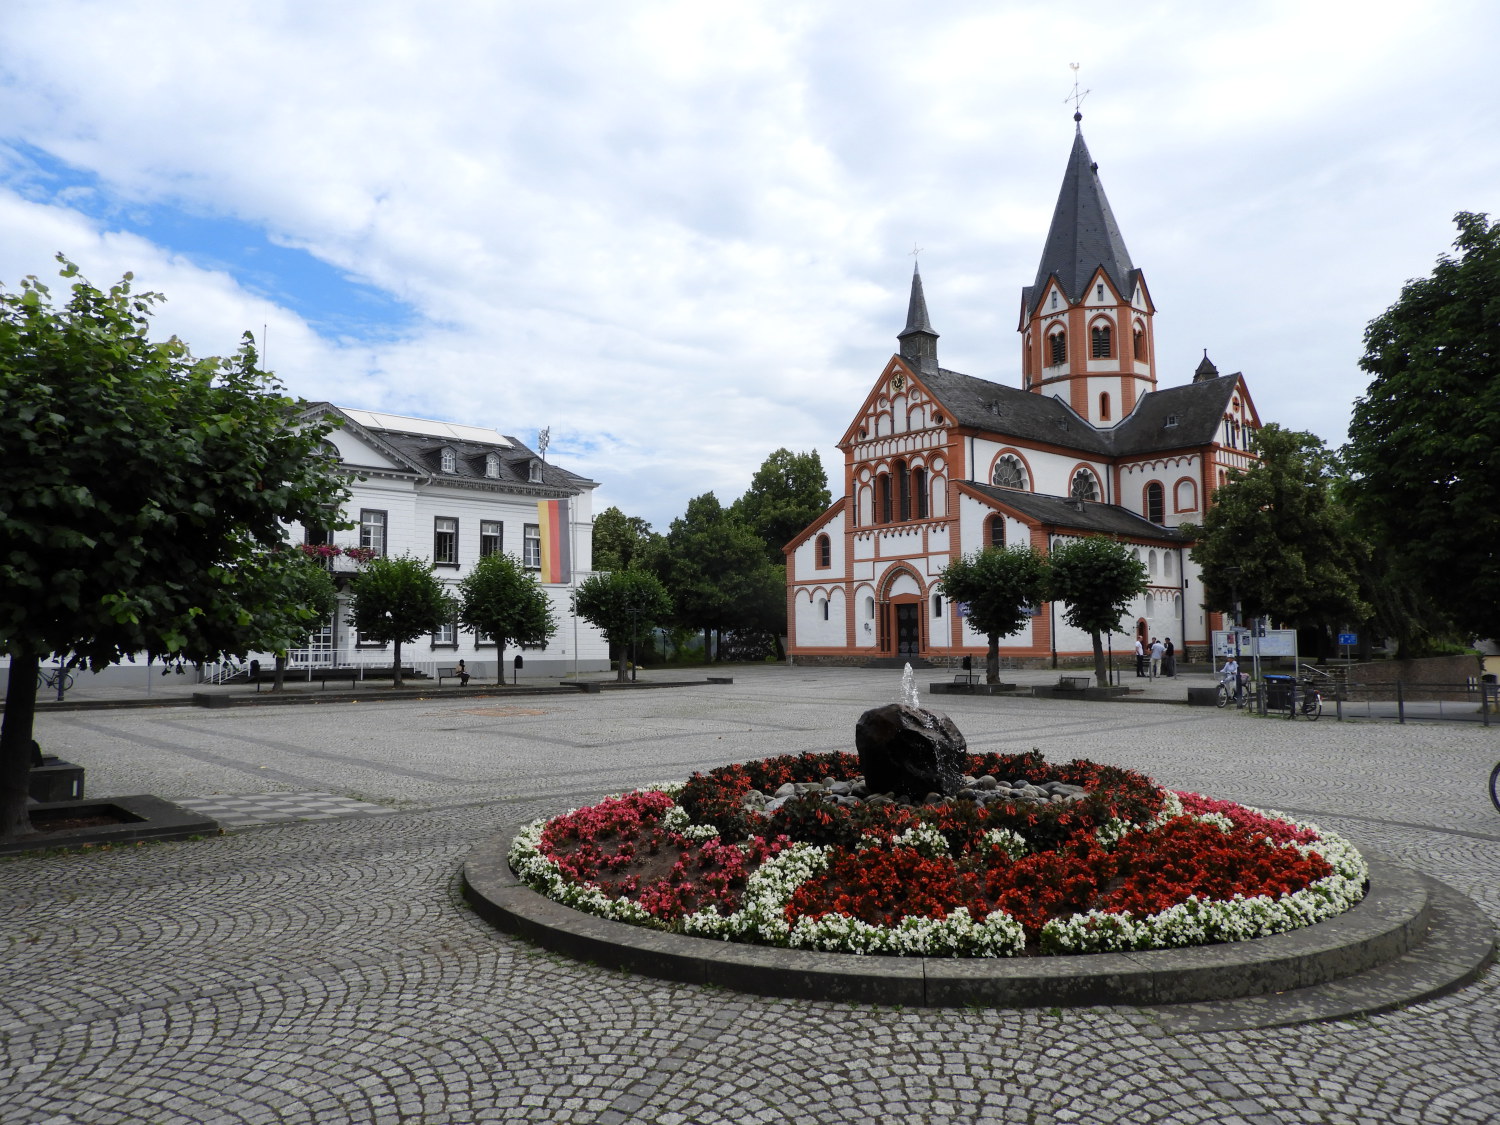 The beautiful town square in Sinzig